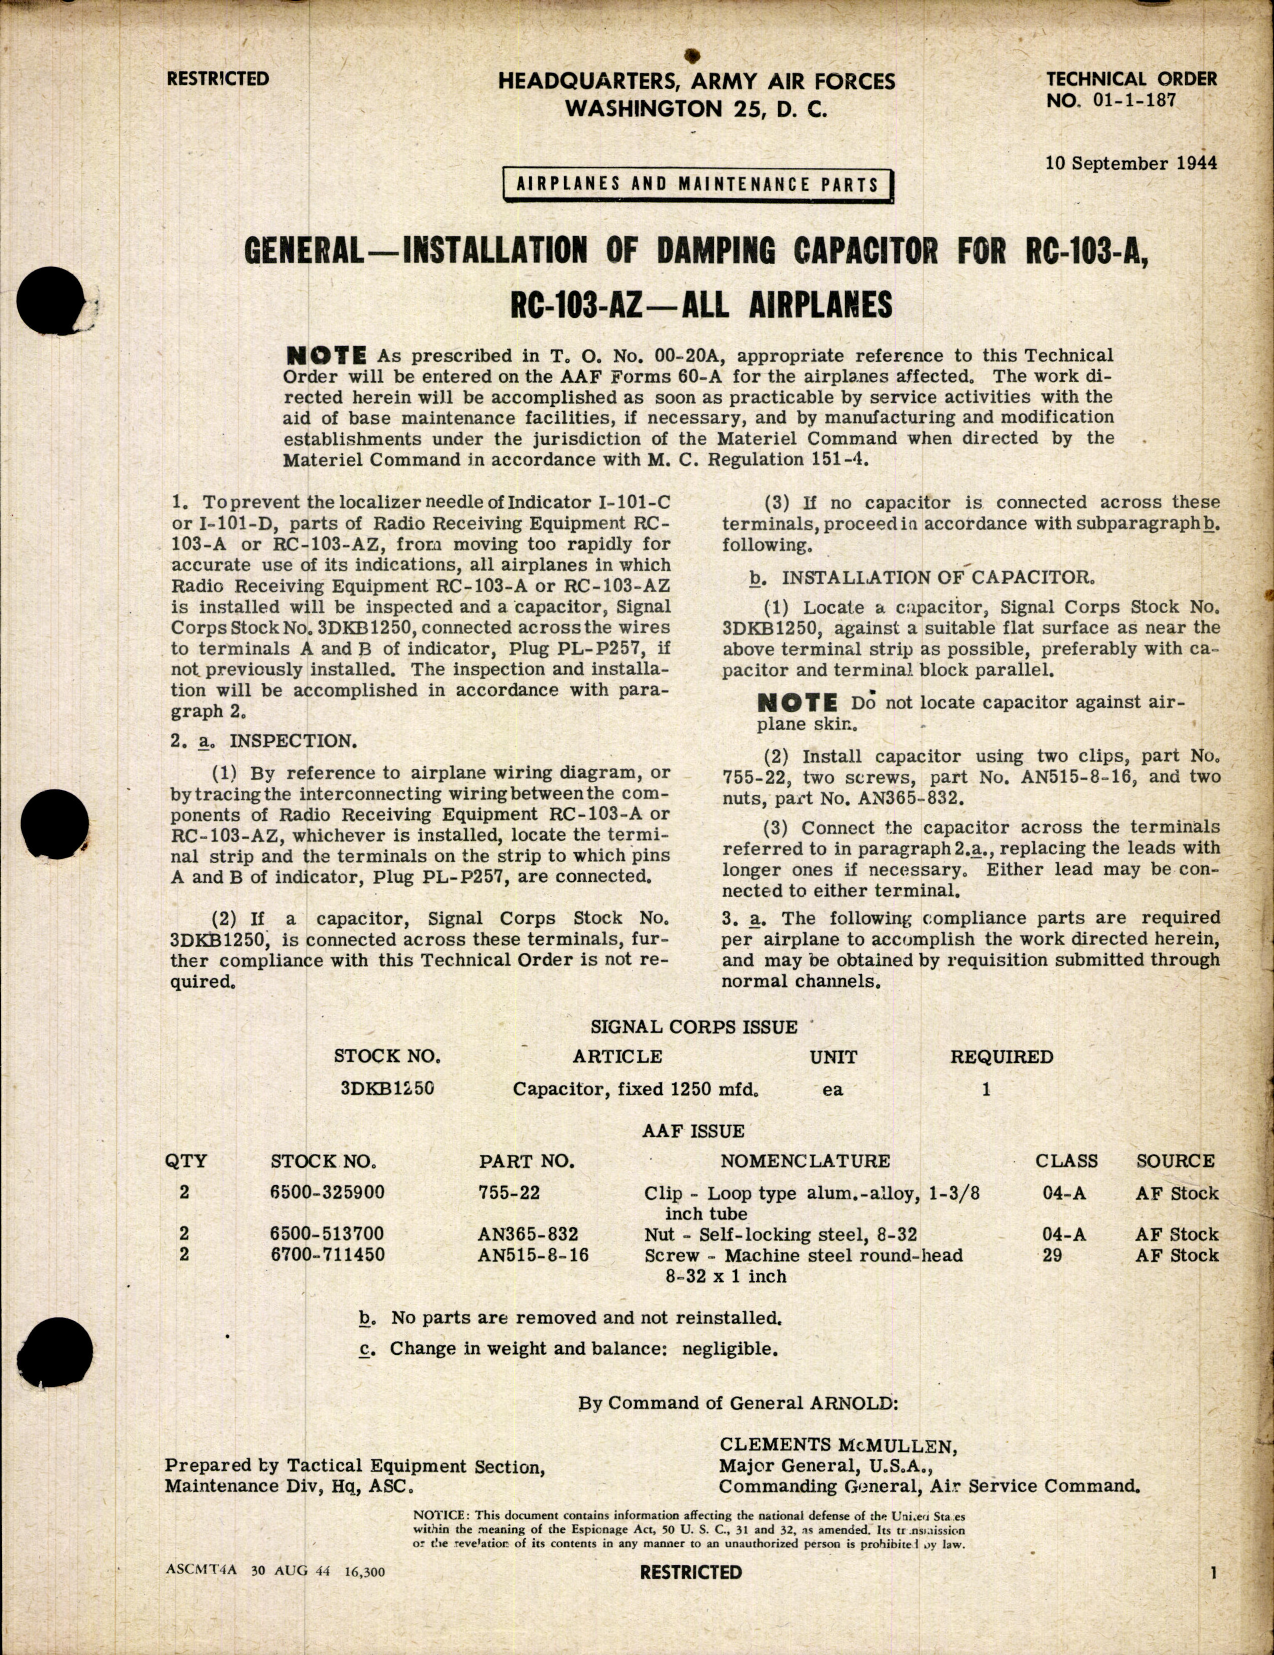 Sample page 1 from AirCorps Library document: Installation of Damping Capacitor for RC-103-A and RC-103-AZ for All Airplanes